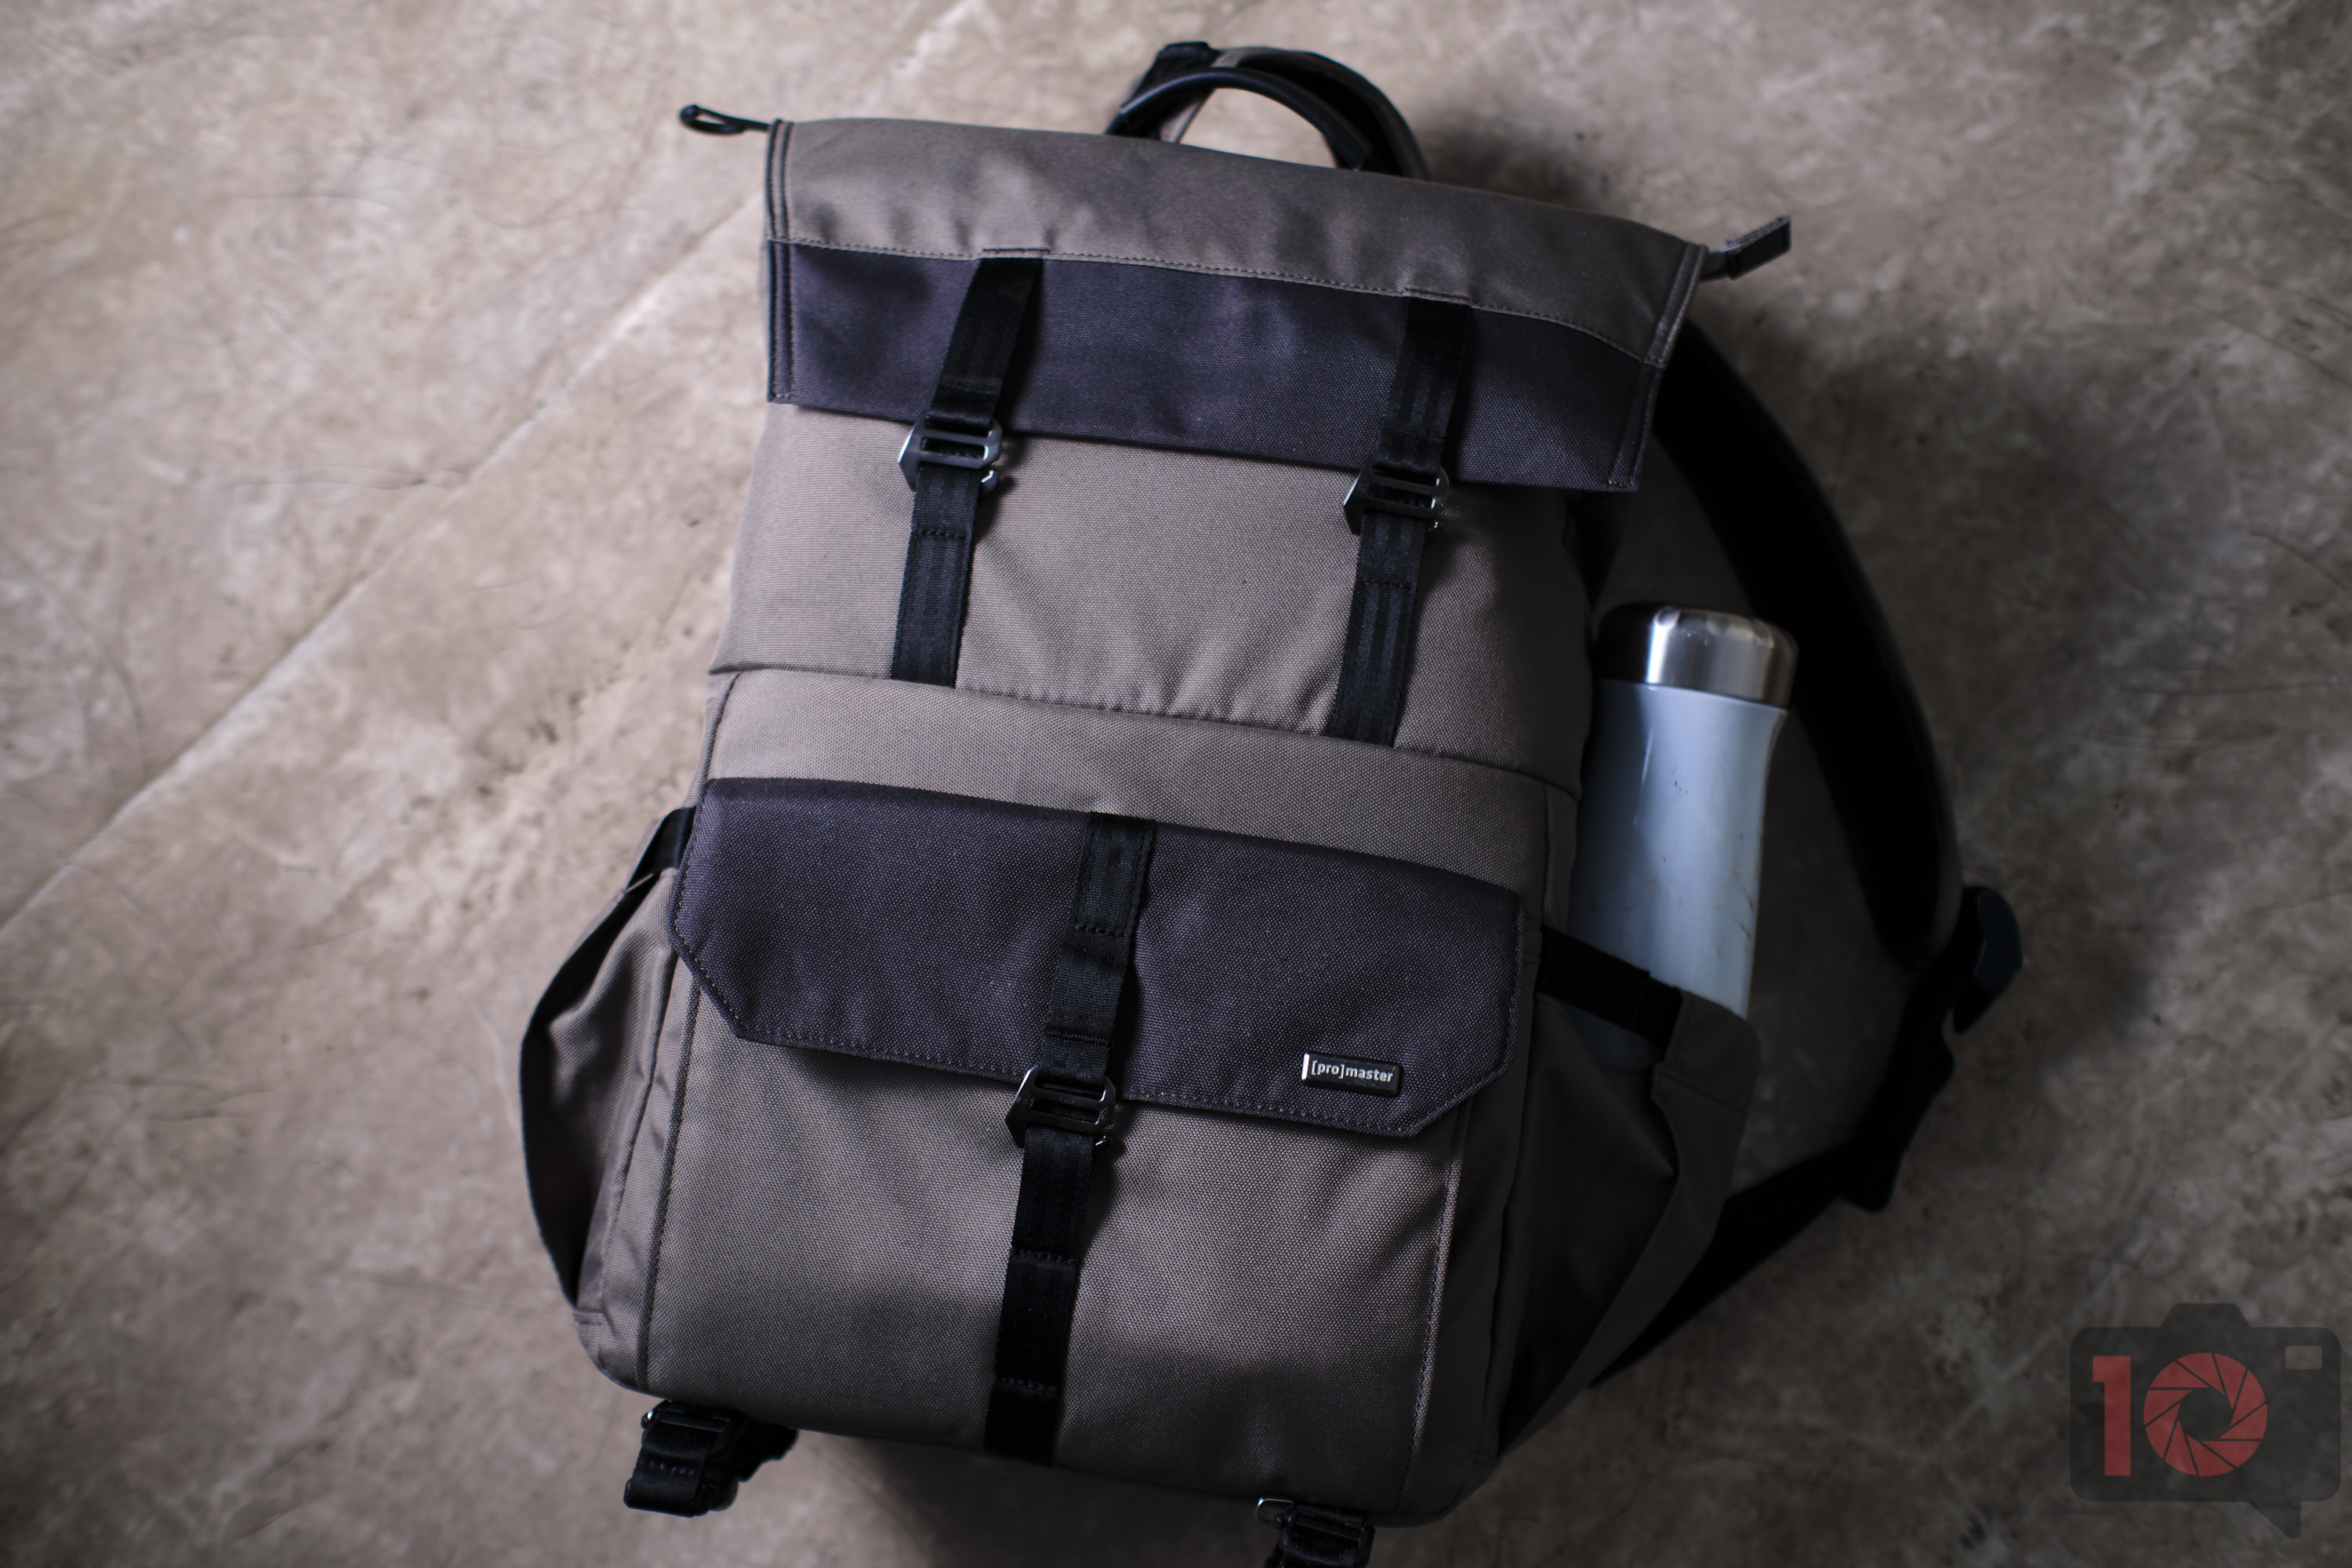 7 Stylish and Affordable Camera Bags You Can Buy For Under $150